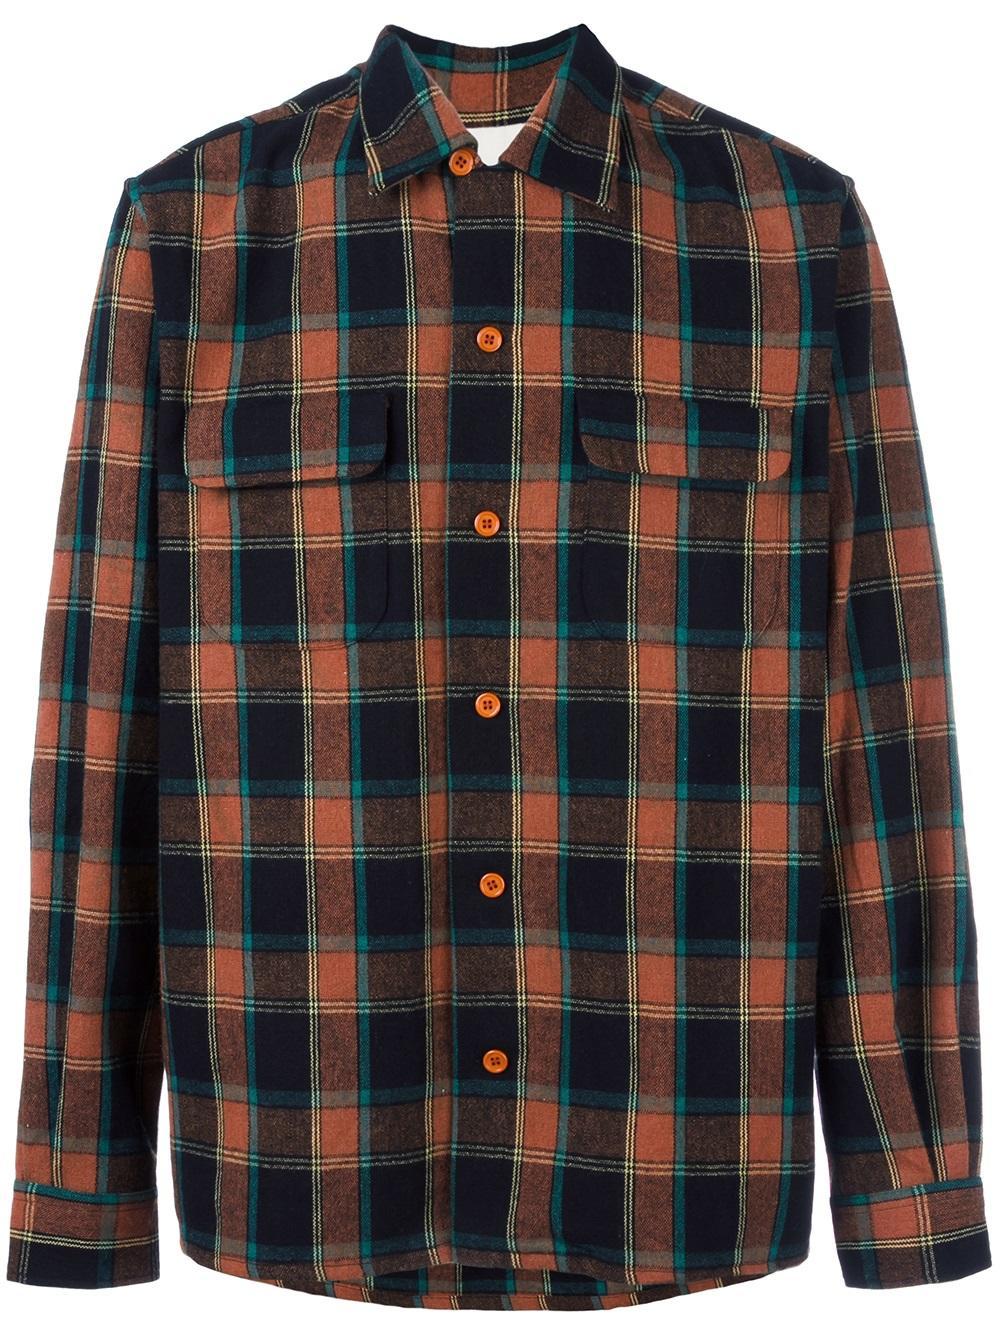 Levis DELUXE CHECK SHIRT Red - LVC DOGTOOTH RED